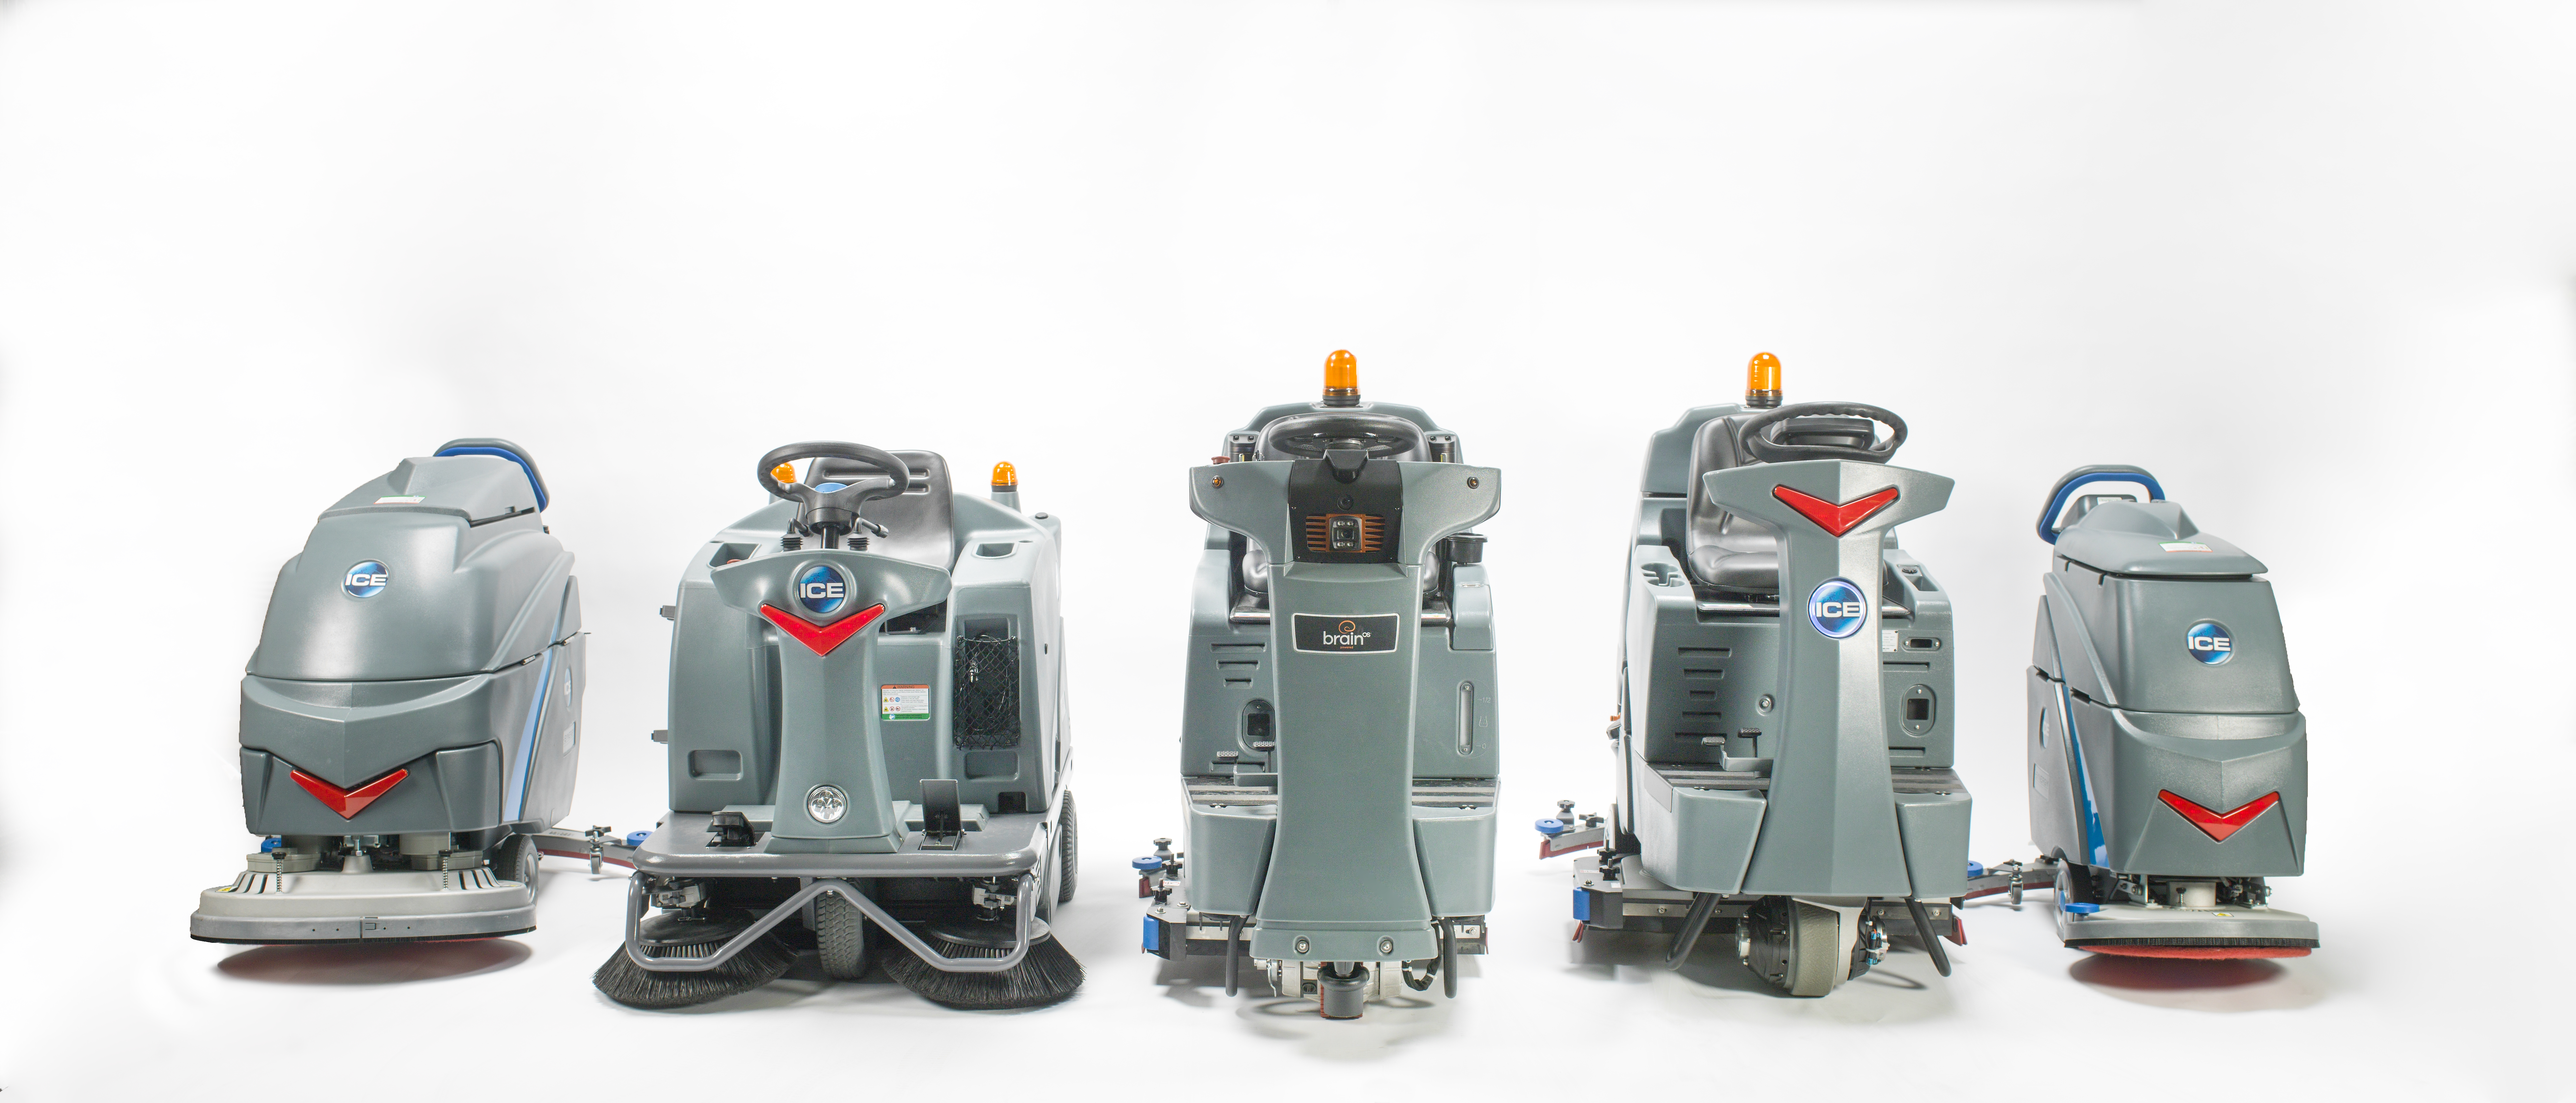 line up of commercial cleaning equipment machines: walk-behind and ride-on scrubbers